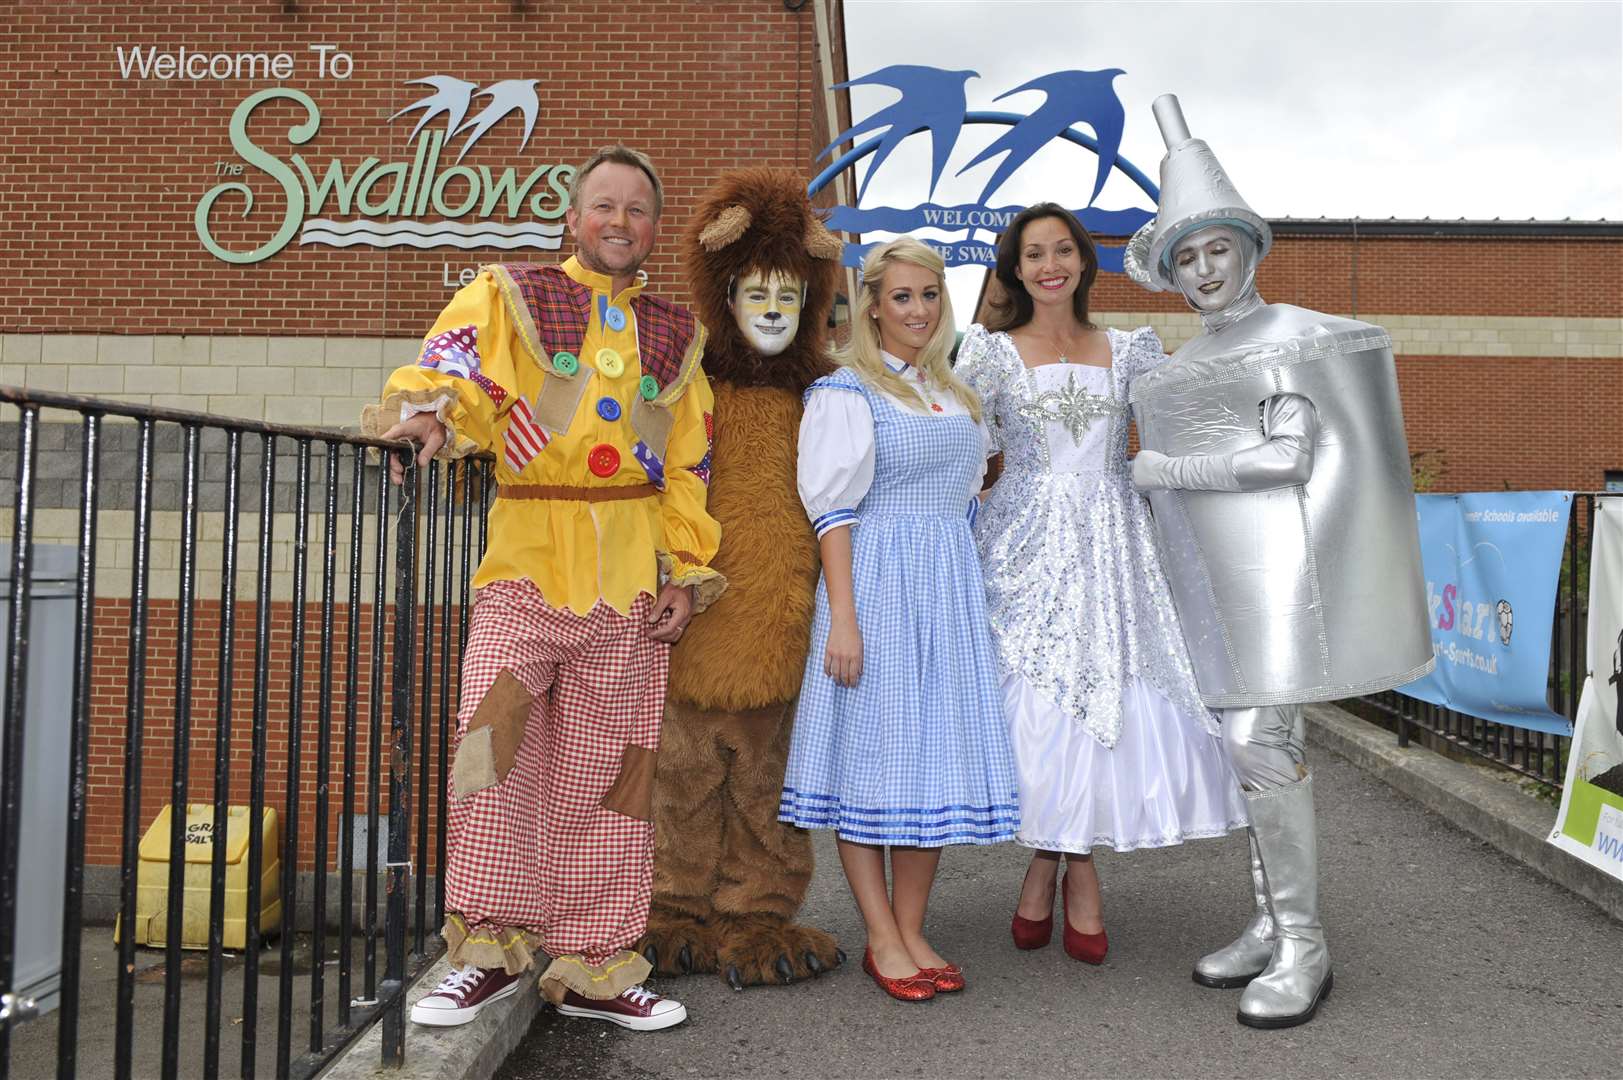 The cast of the Wizard of Oz pantomime at The Swallows leisure centre in Sittingbourne in 2015. Picture: Tony Flashman